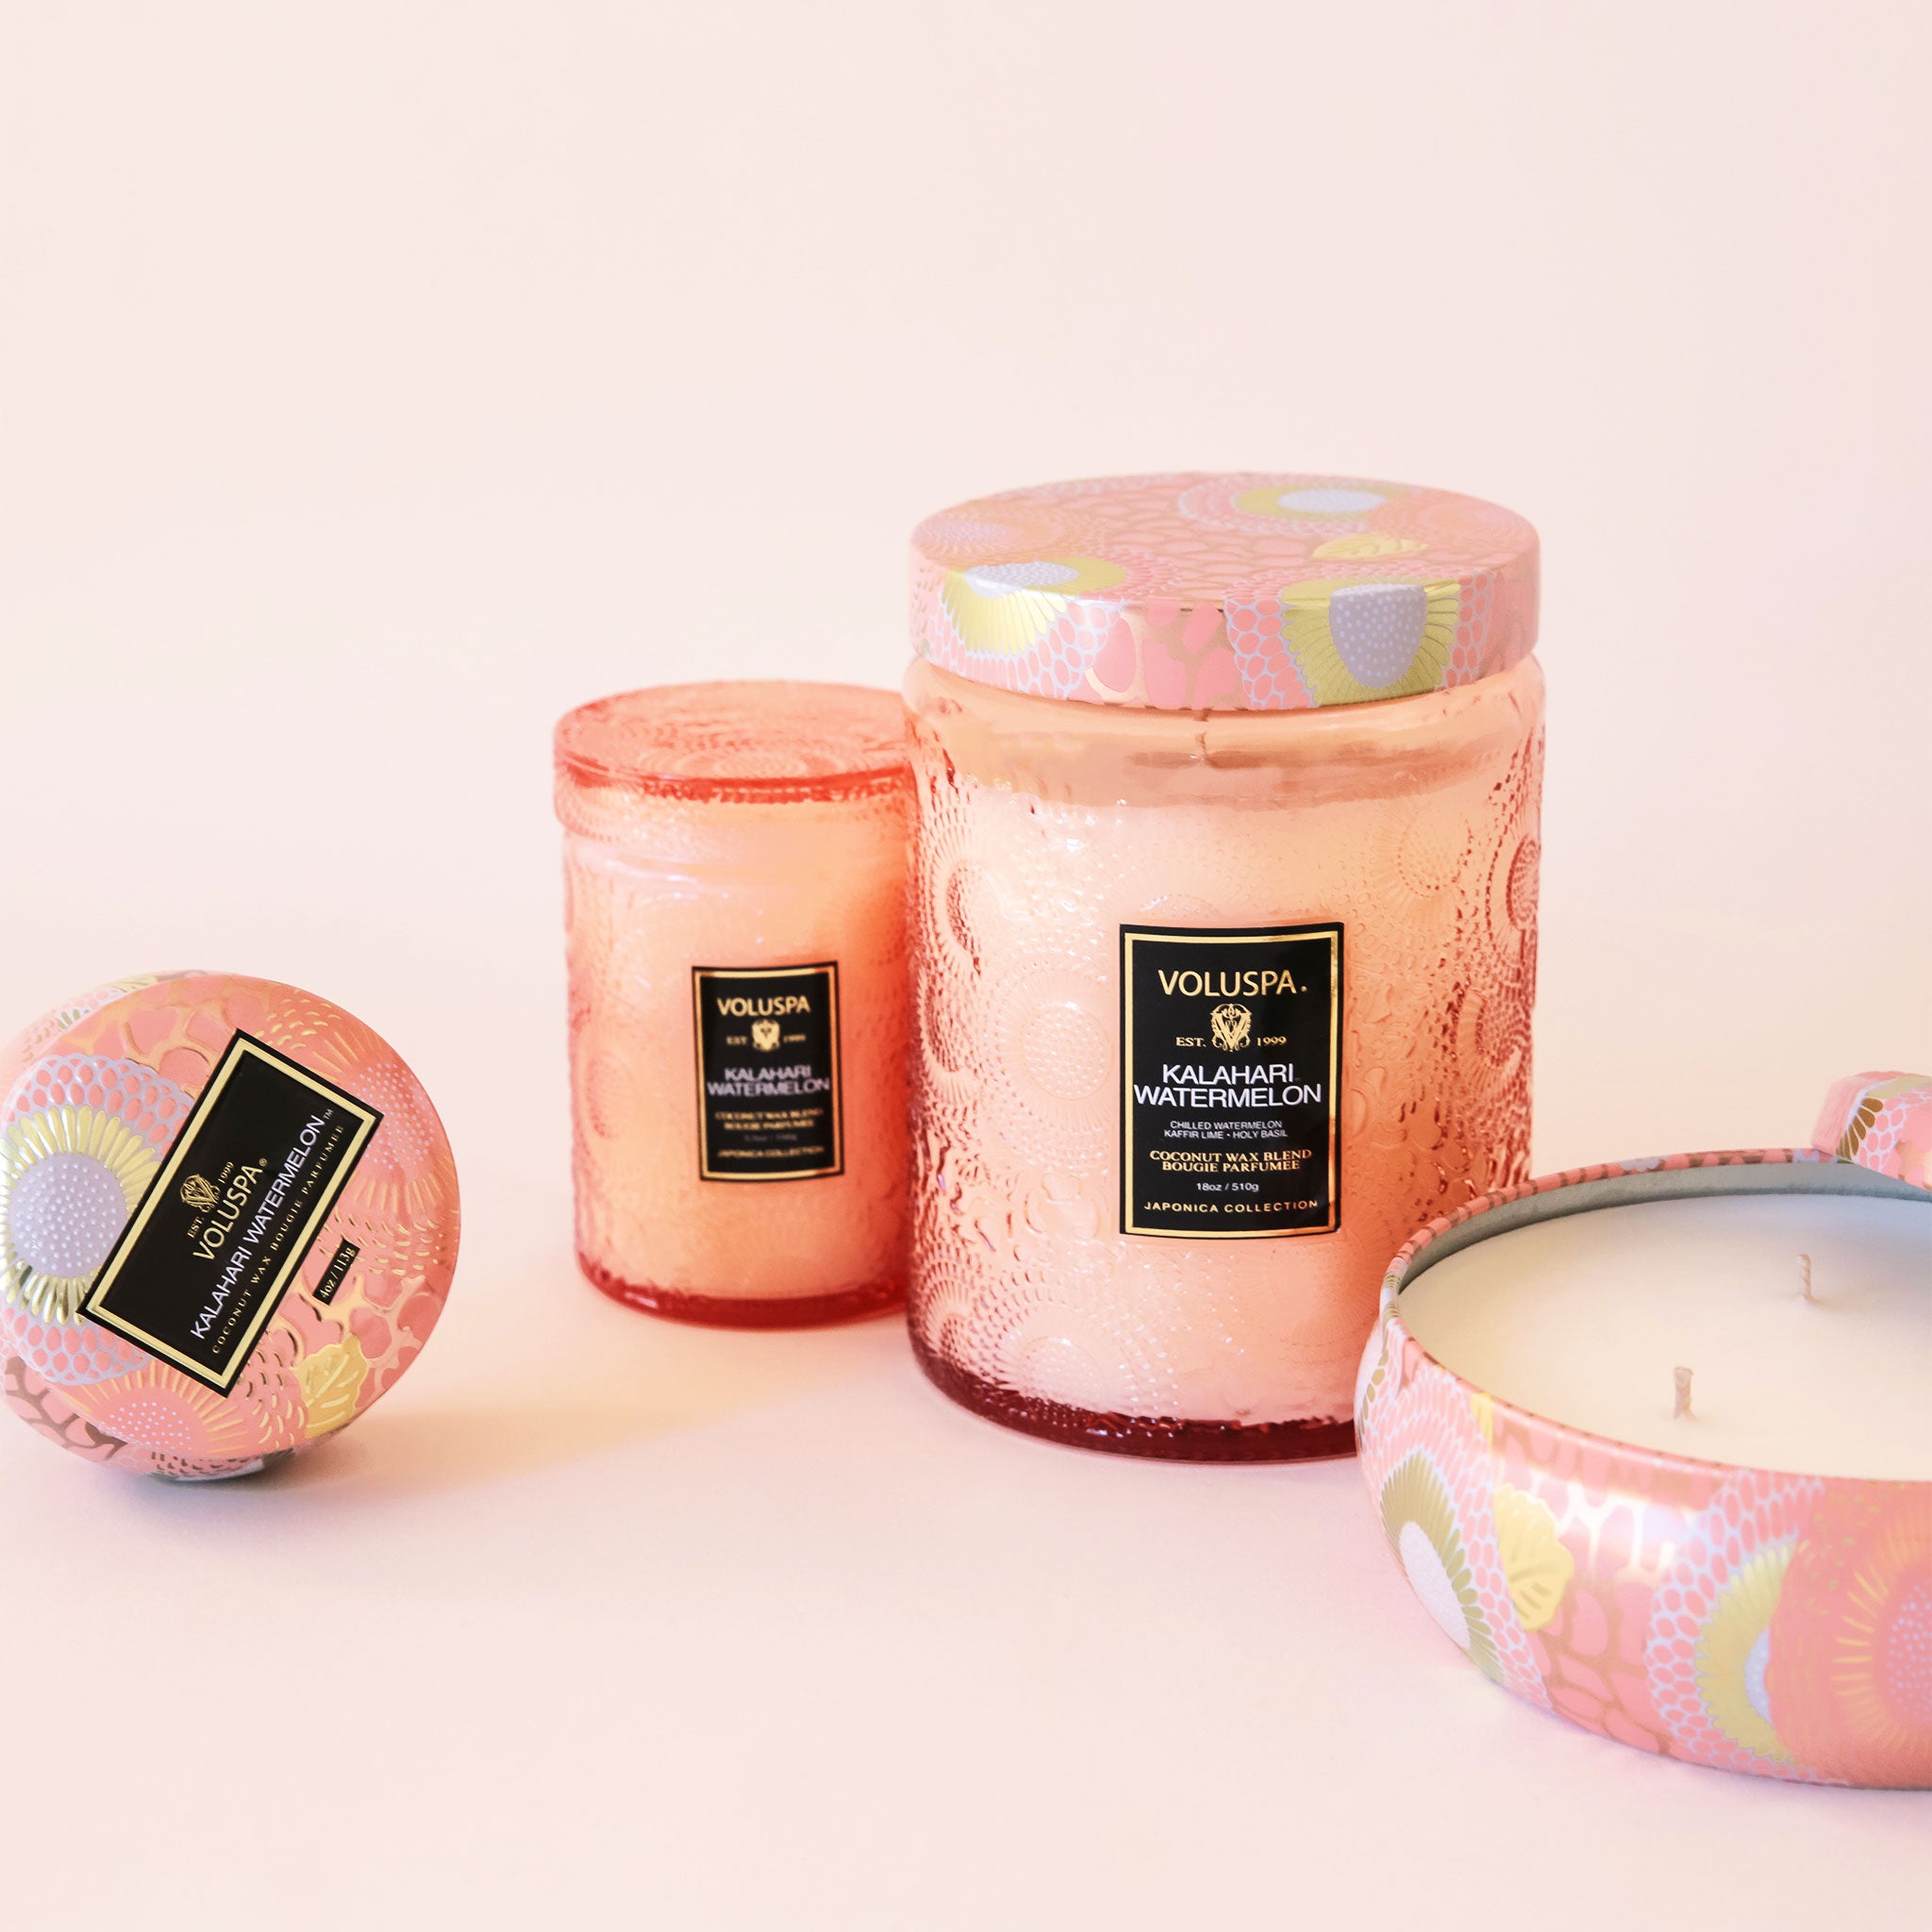 The Kalahari collection shown together with the Large Jar, small jar, 3-wick tin, and mini tin. Its colors are beautiful and the jar&#39;s glass distributes light in a romantic way.